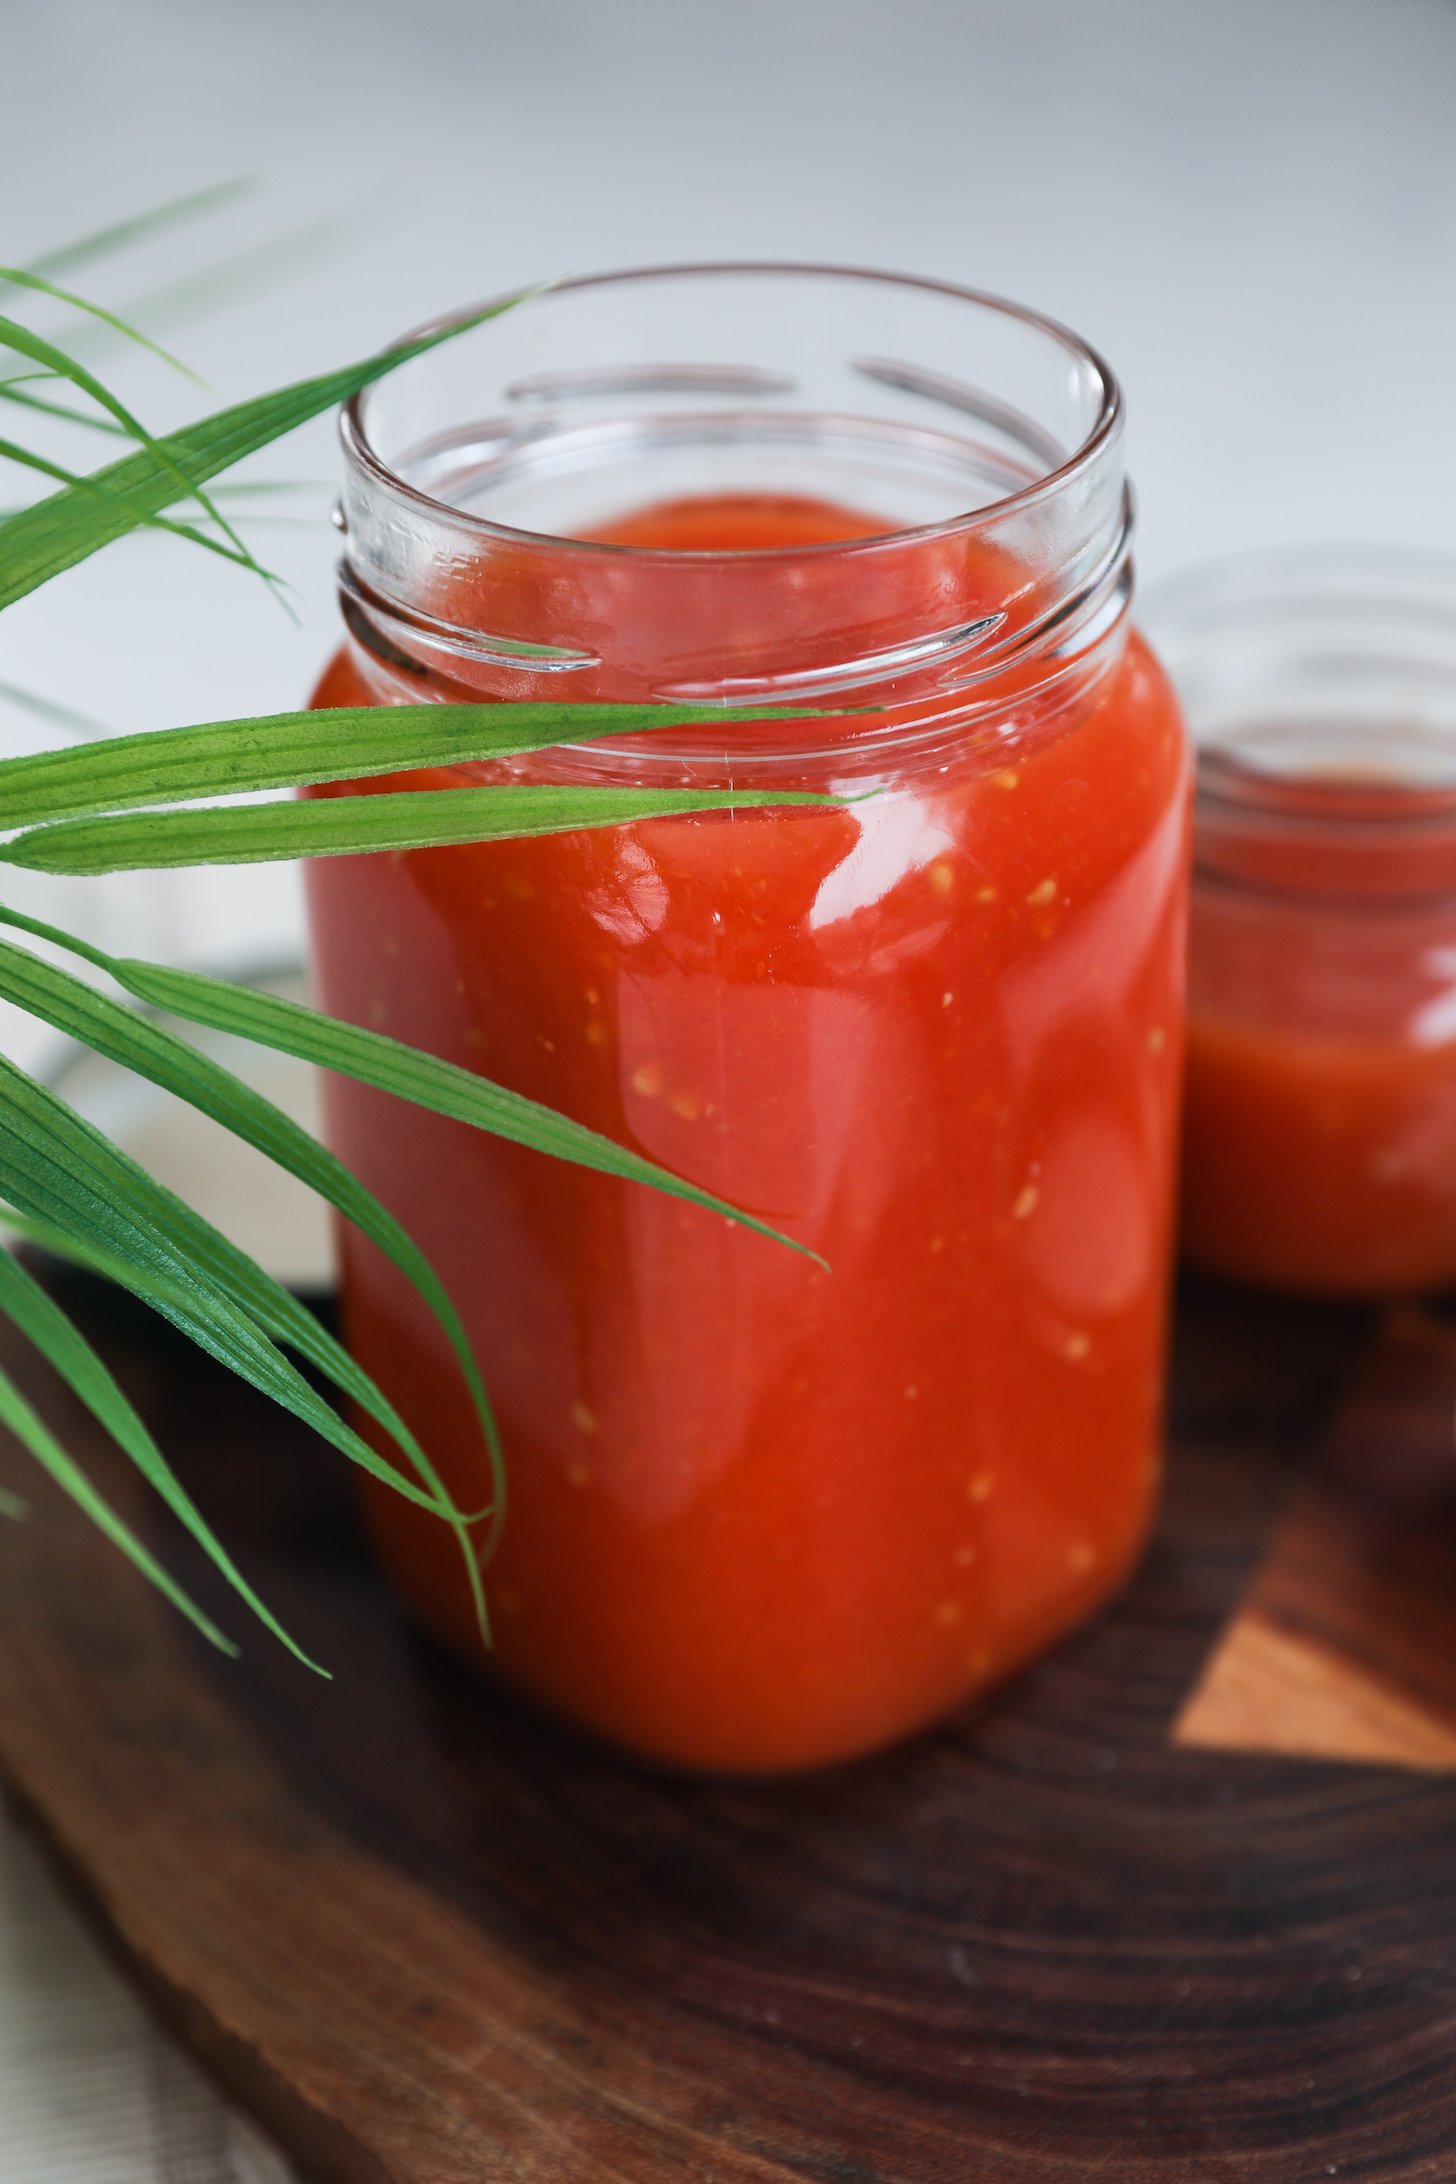 Perspective shot of a large and small jar of tomato puree.